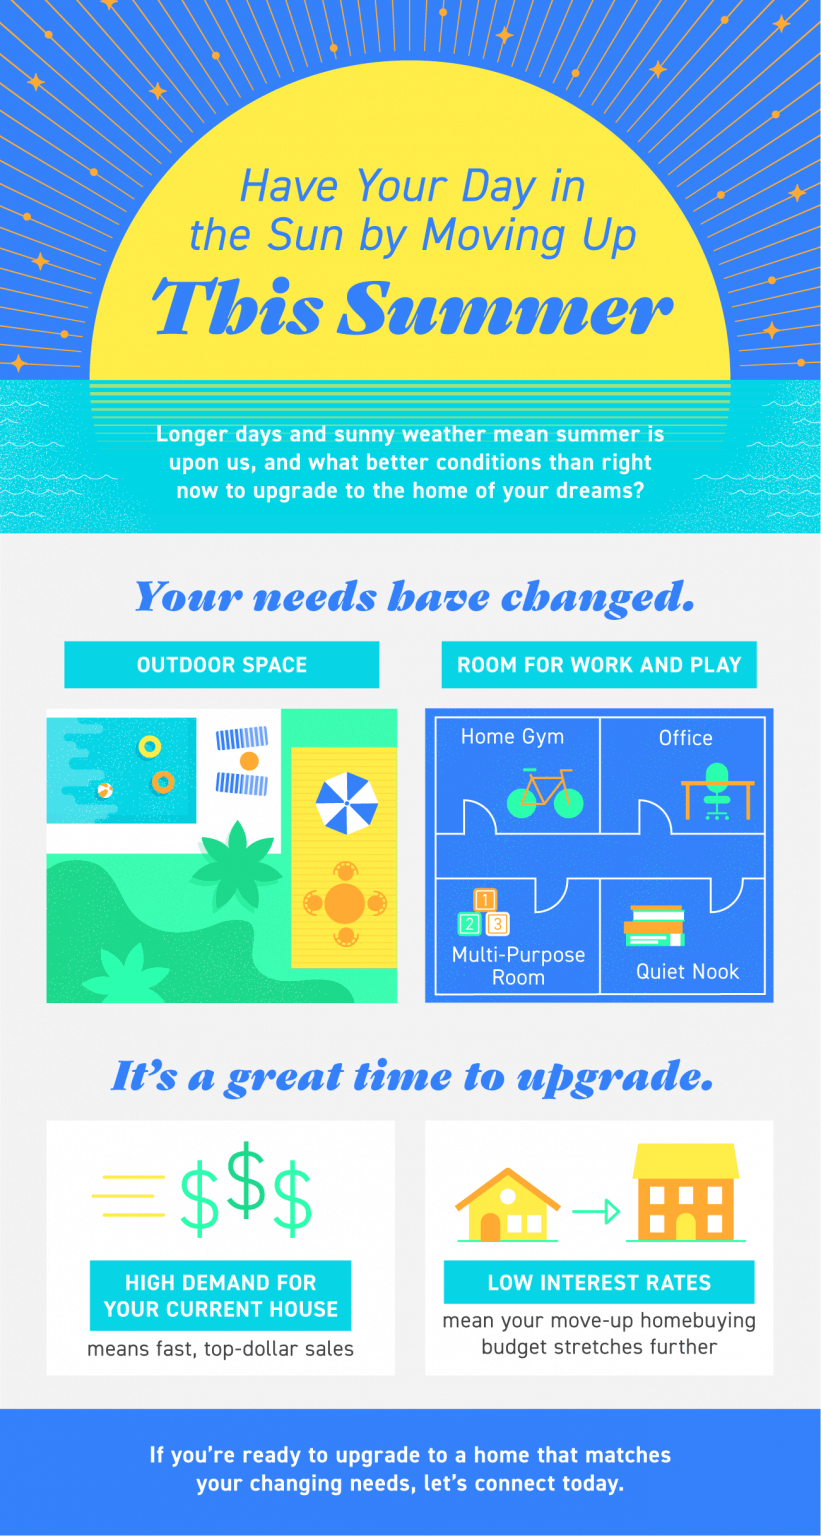 Have Your Day in the Sun by Moving Up This Summer [INFOGRAPHIC] 20210611-MEM-821x1536